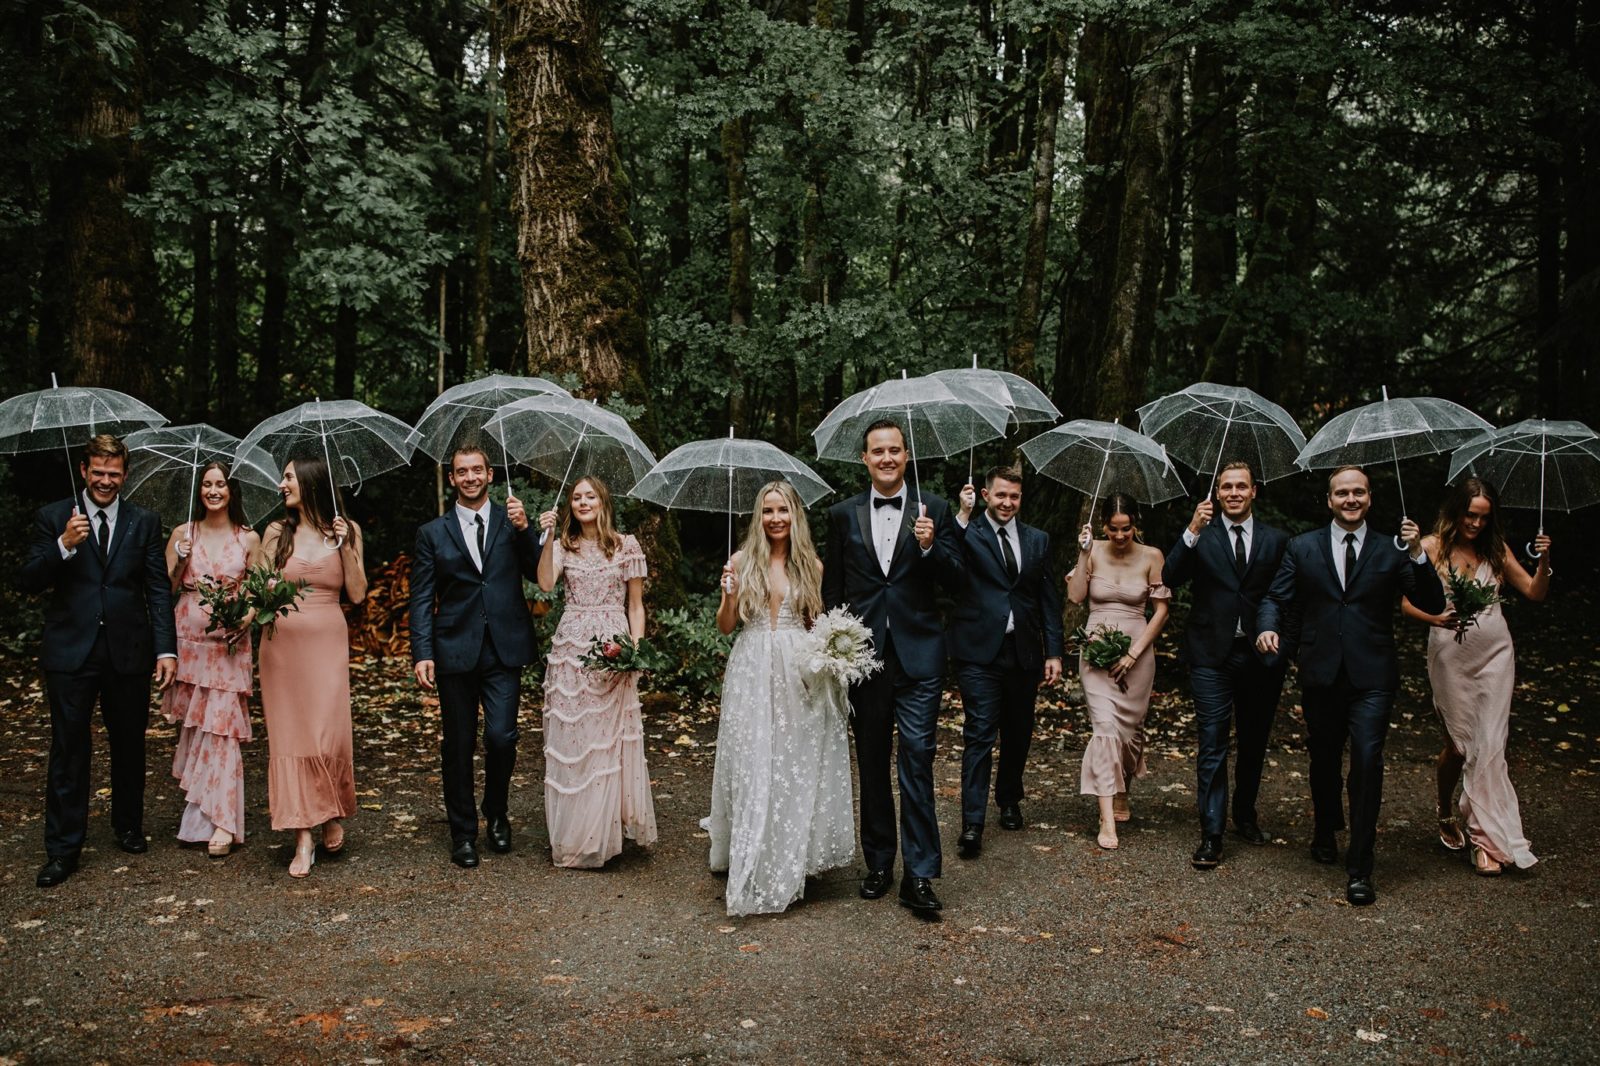 Starry Night Meets Tropical Paradise in This Rainy & Romantic BC Wedding | Featured on Brontë Bride, Rainy BC Wedding, Outdoor Ceremony